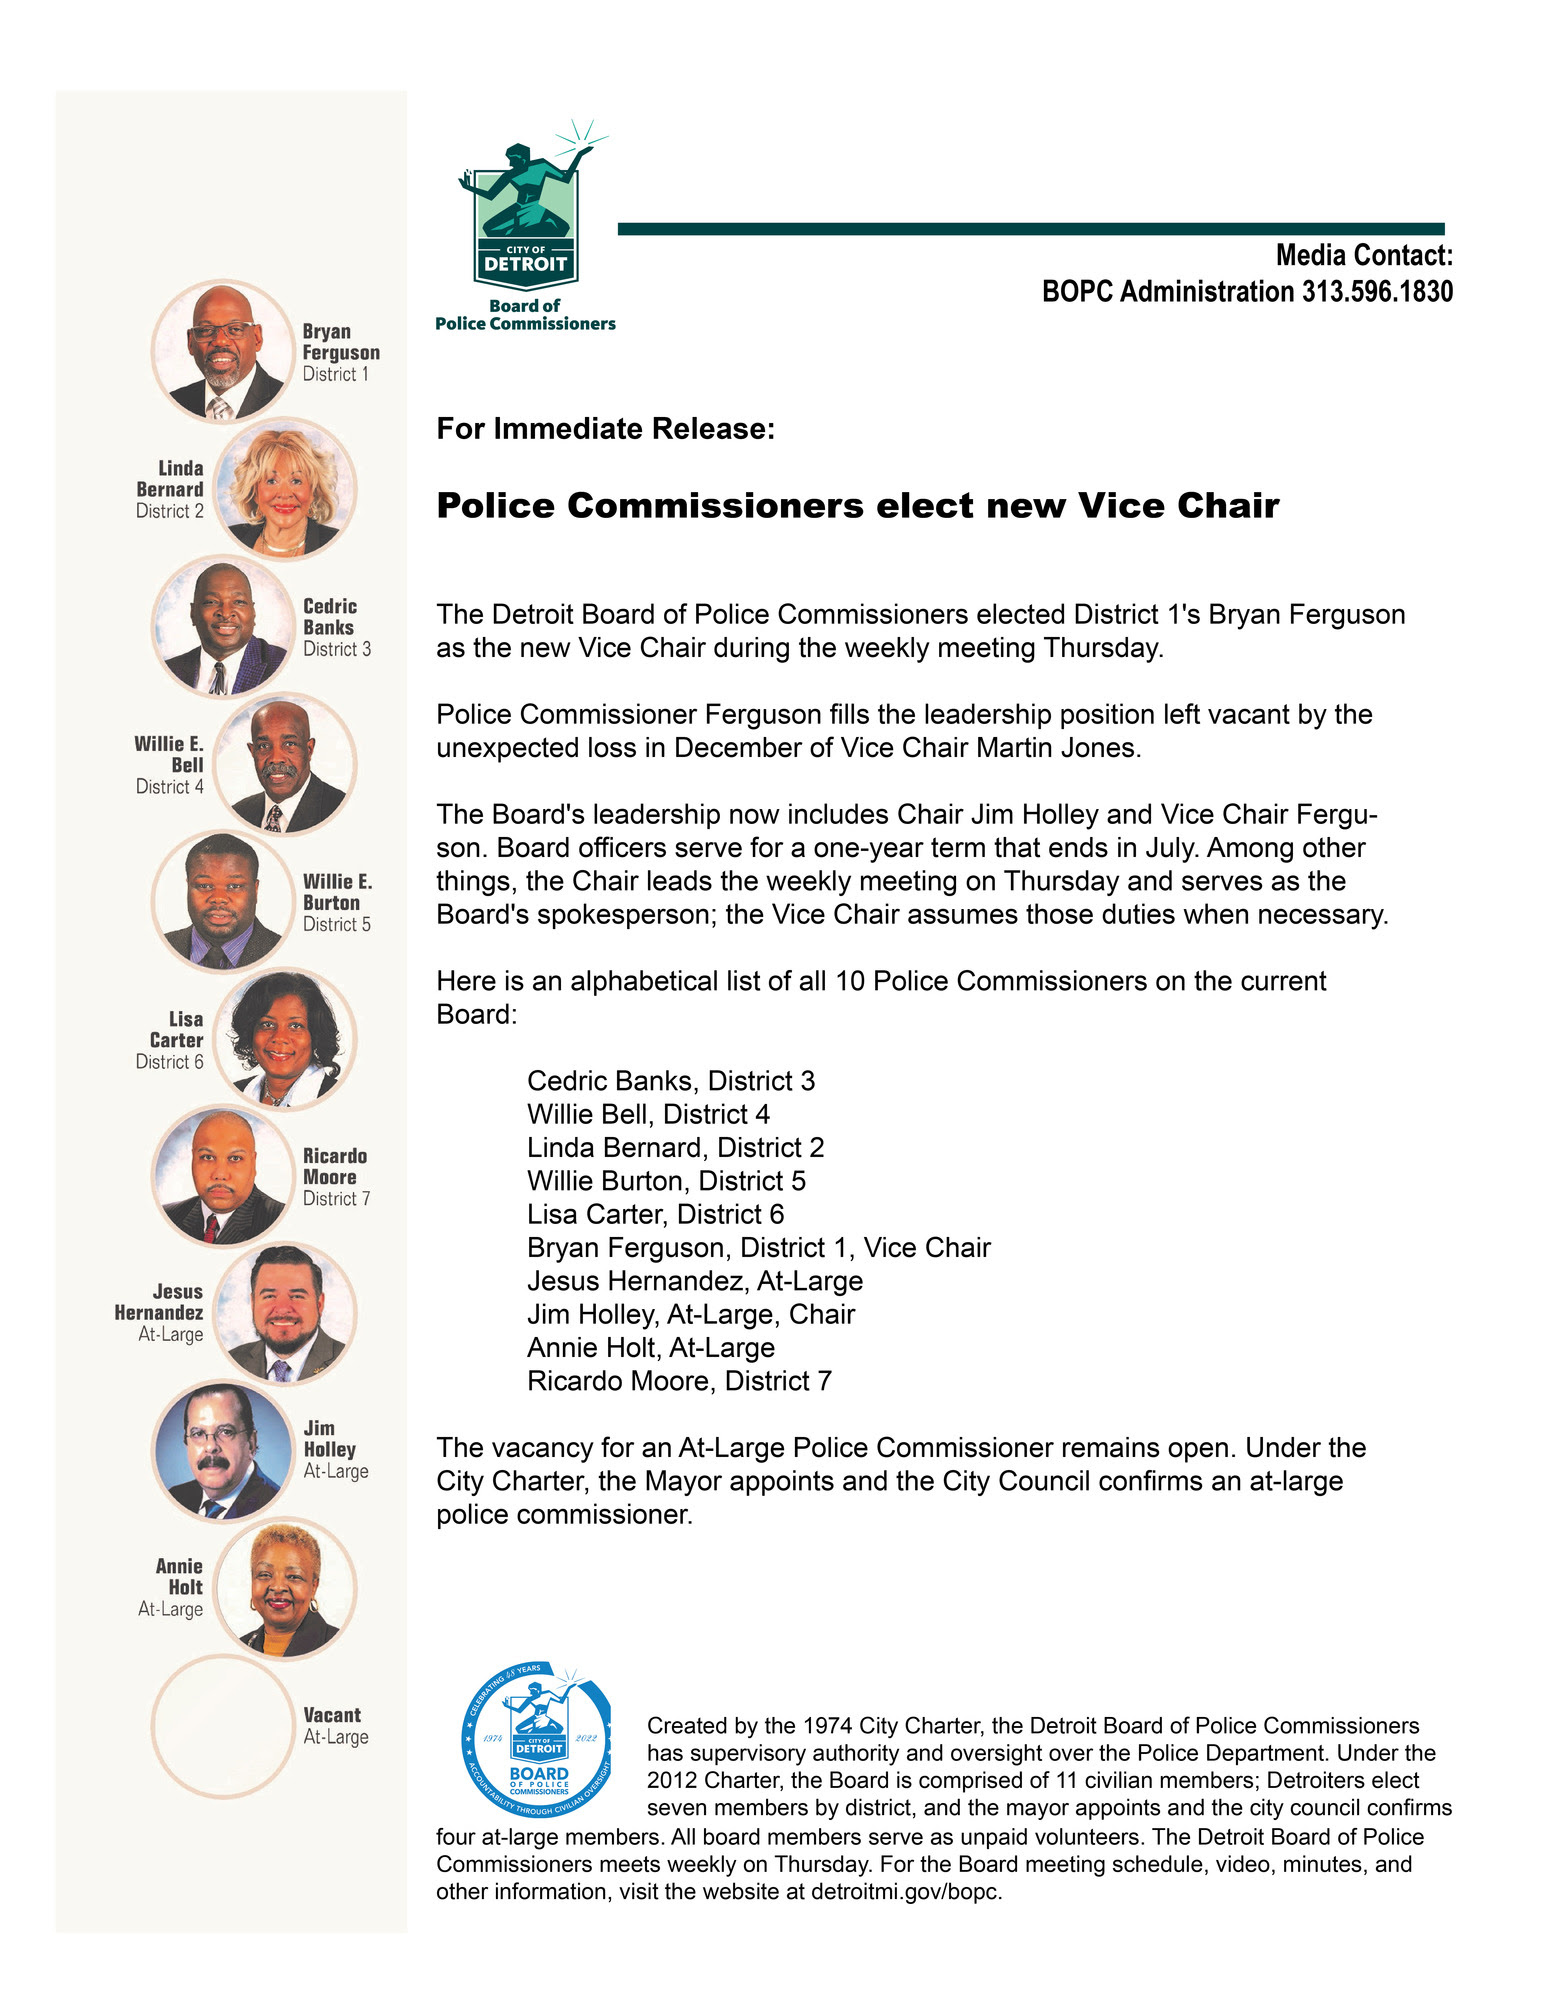 Police Commissioners elect new Vice Chair